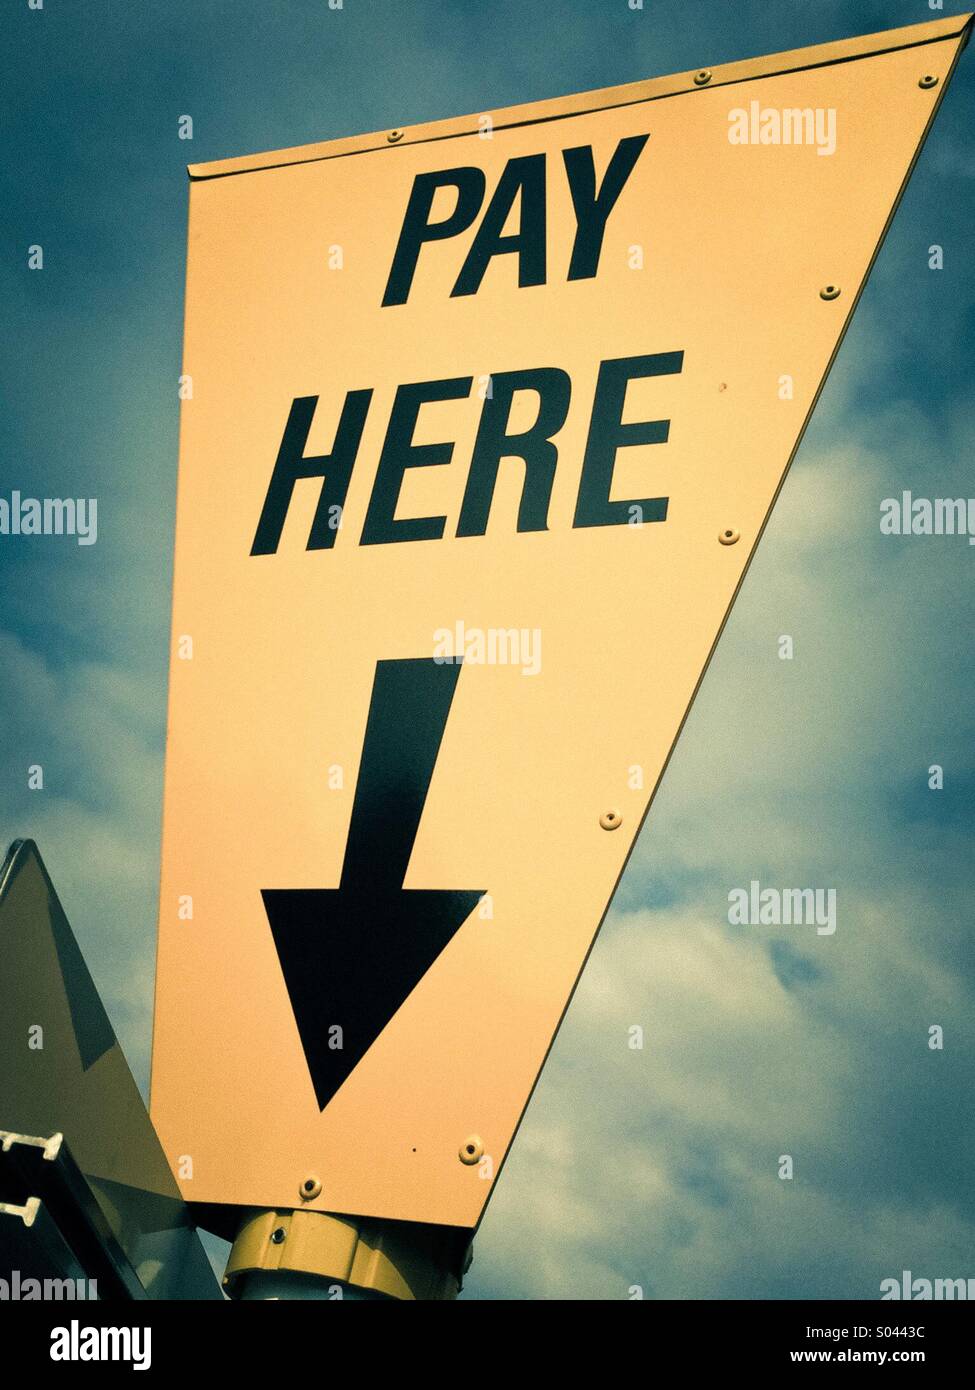 Car park pay here sign Stock Photo